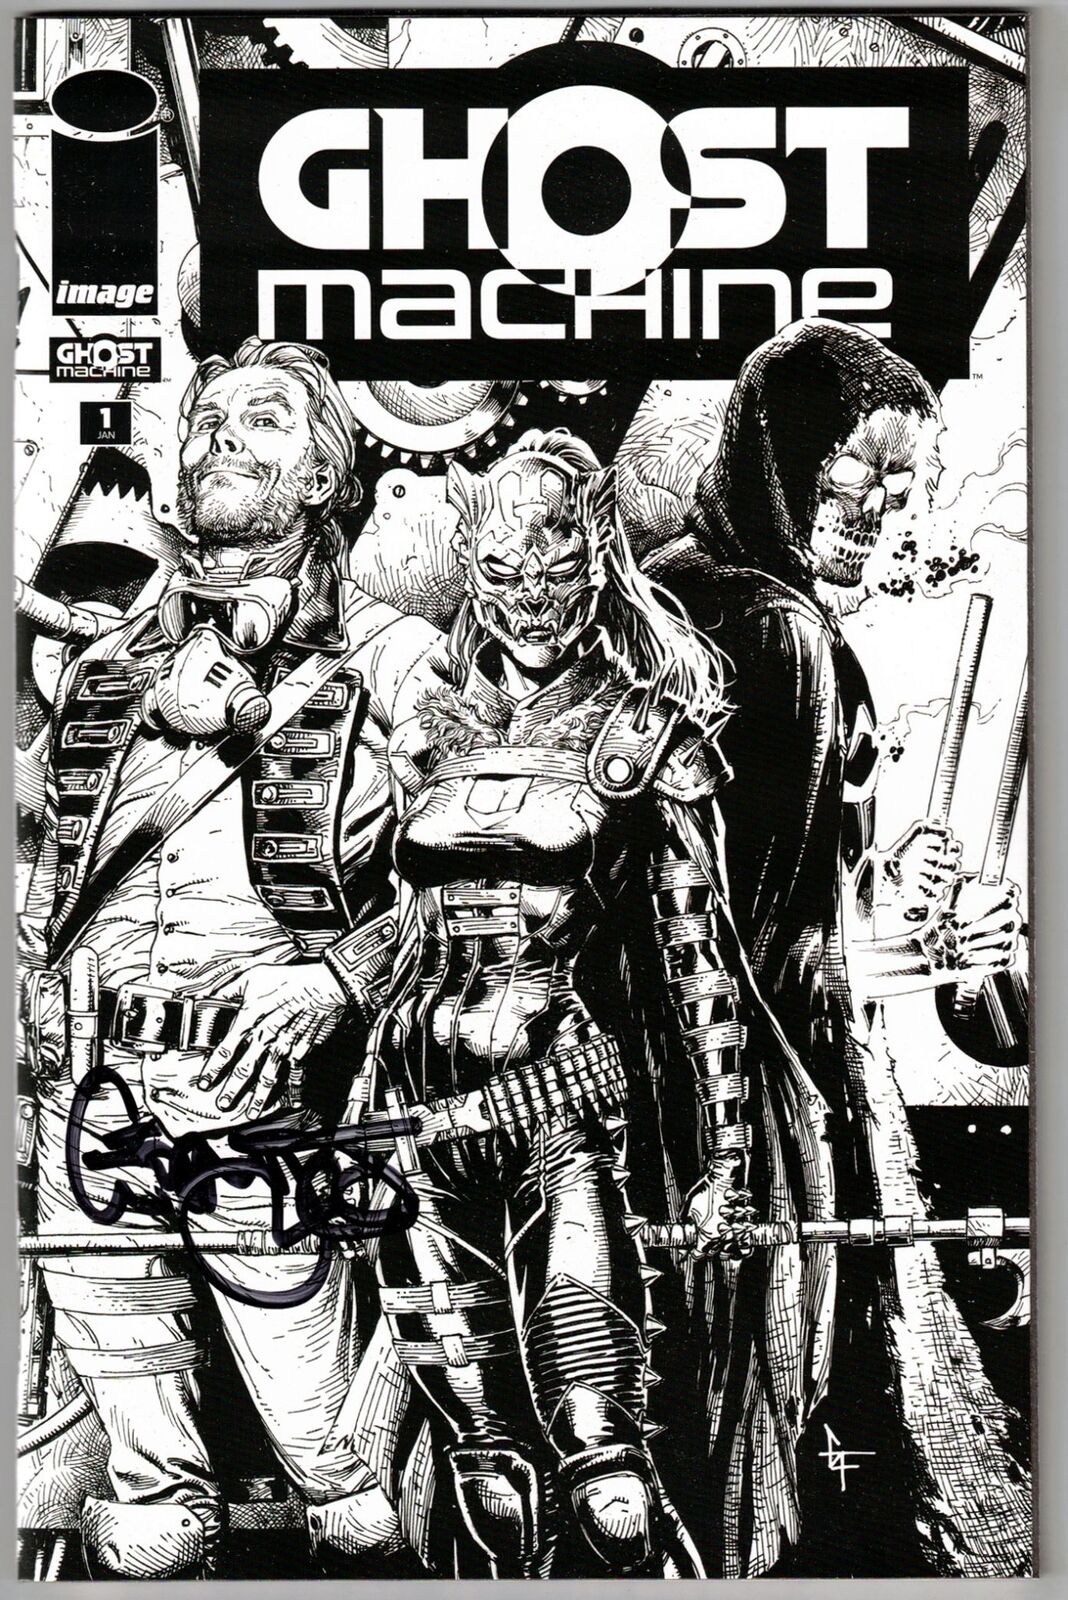 GHOST MACHINE #1-BW COMICSPRO EXCLUSIVE VARIANT- SIGNED GEOFF JOHNS W/COA- IMAGE